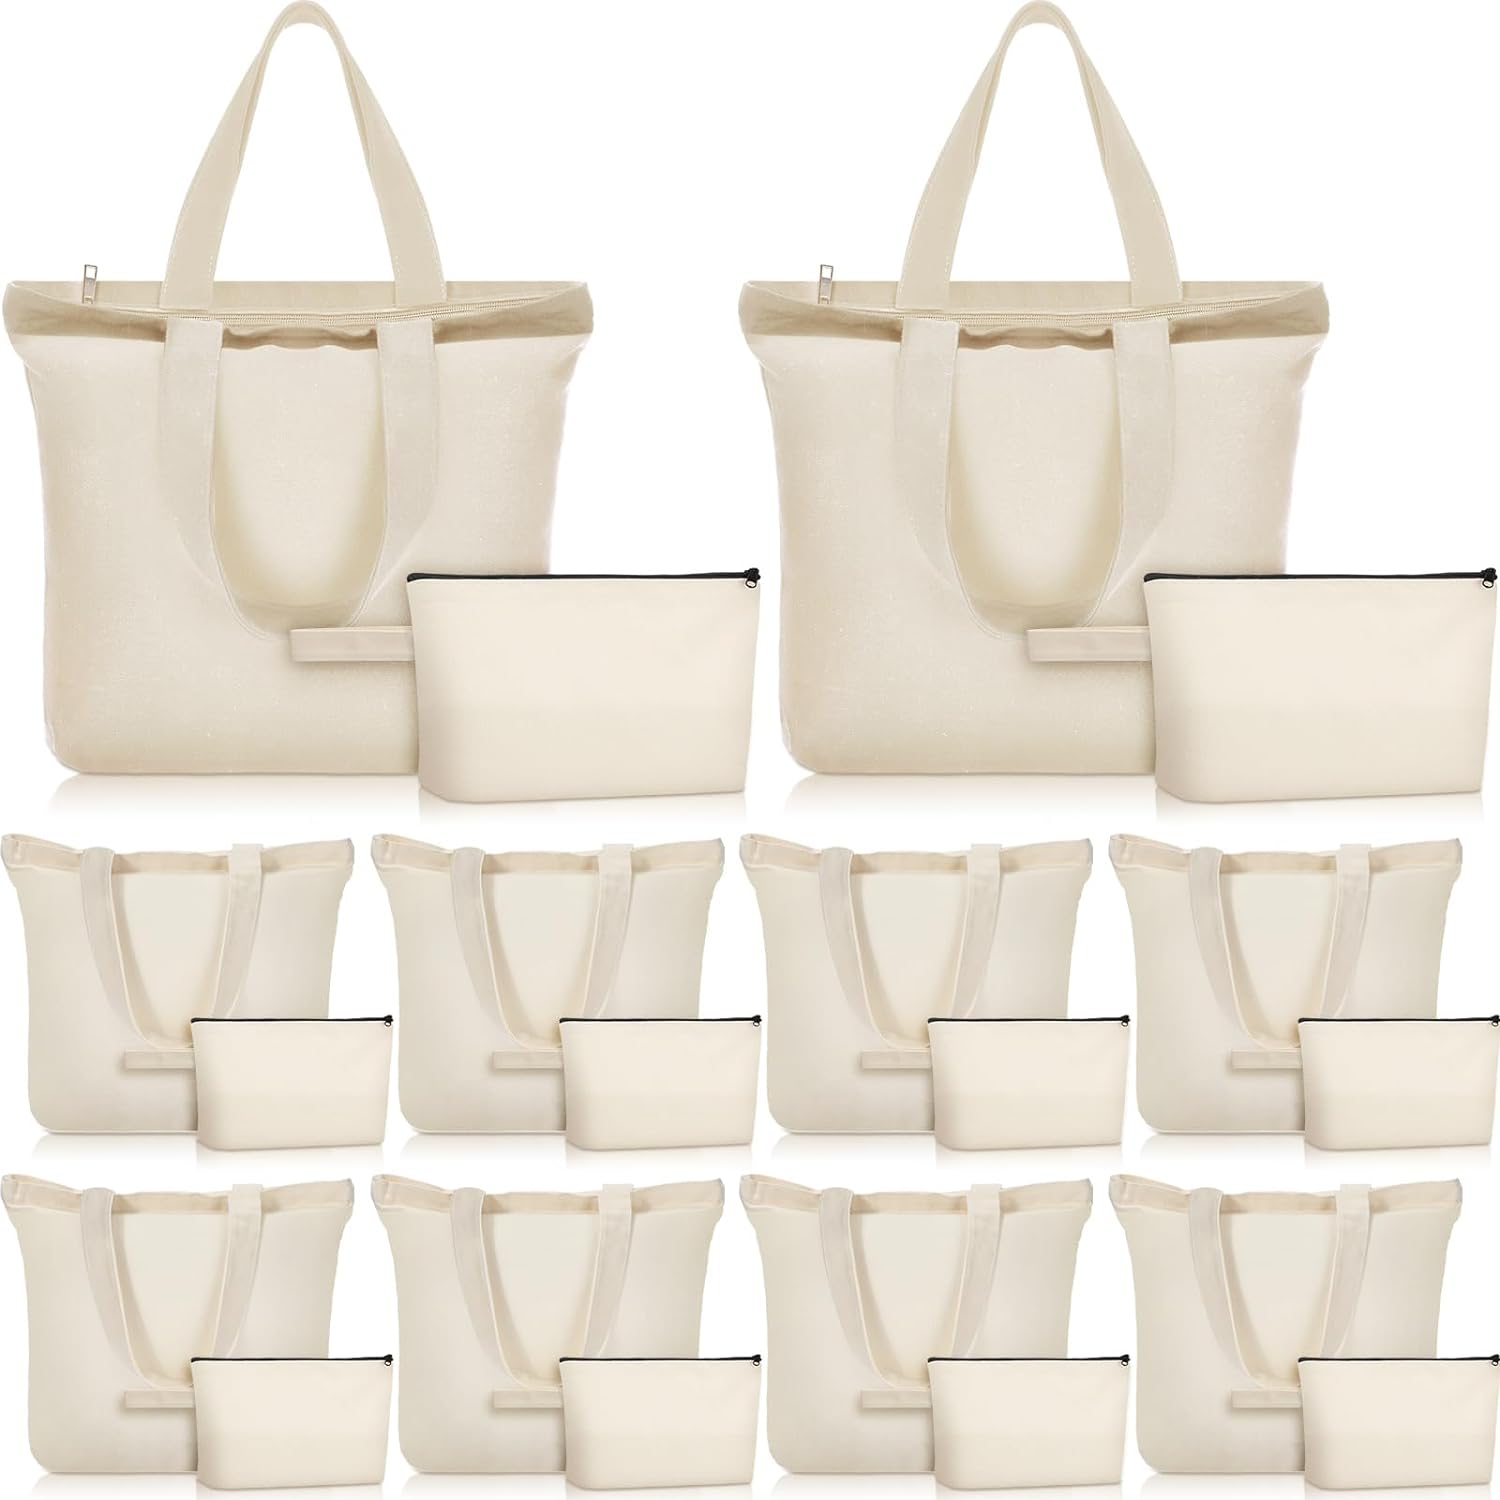 20 Pcs Tote Bag with Zipper, Cotton Canvas Makeup Bag Kitchen Reusable Grocery Bags Blank Canvas Totes with Handles